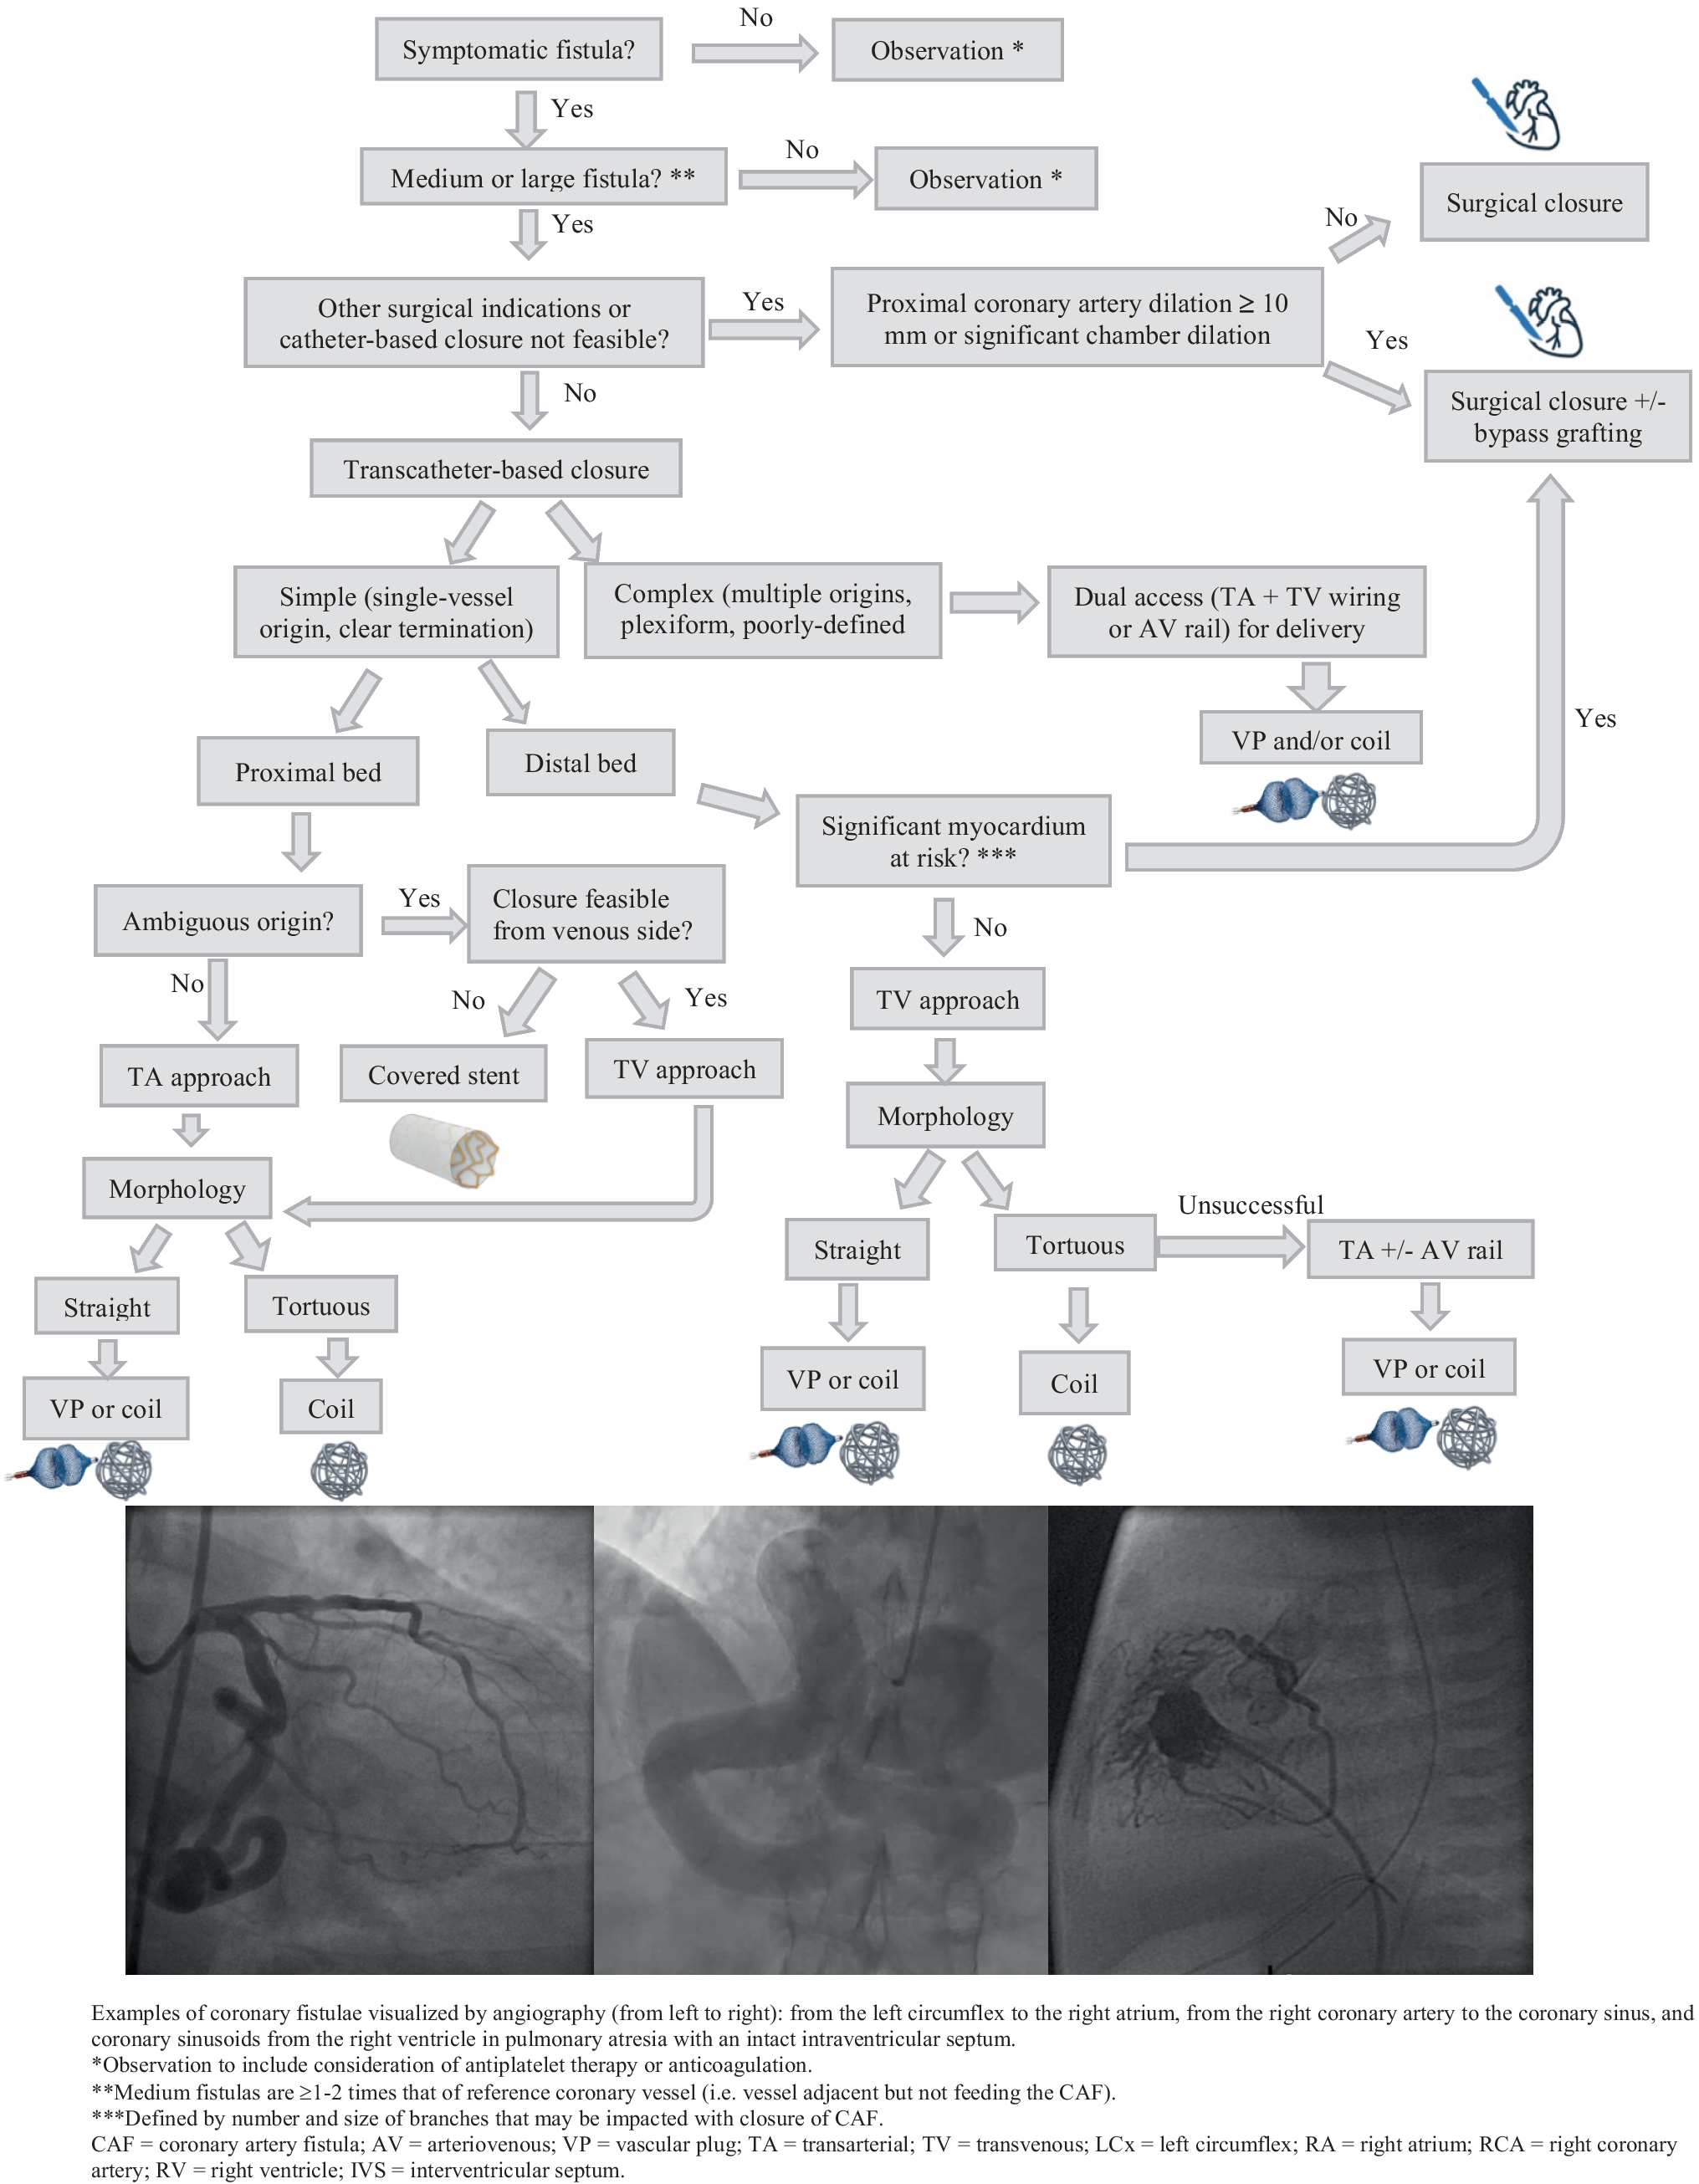 Diagnosis and Management of Congenital Coronary Artery Fistulas in Adults